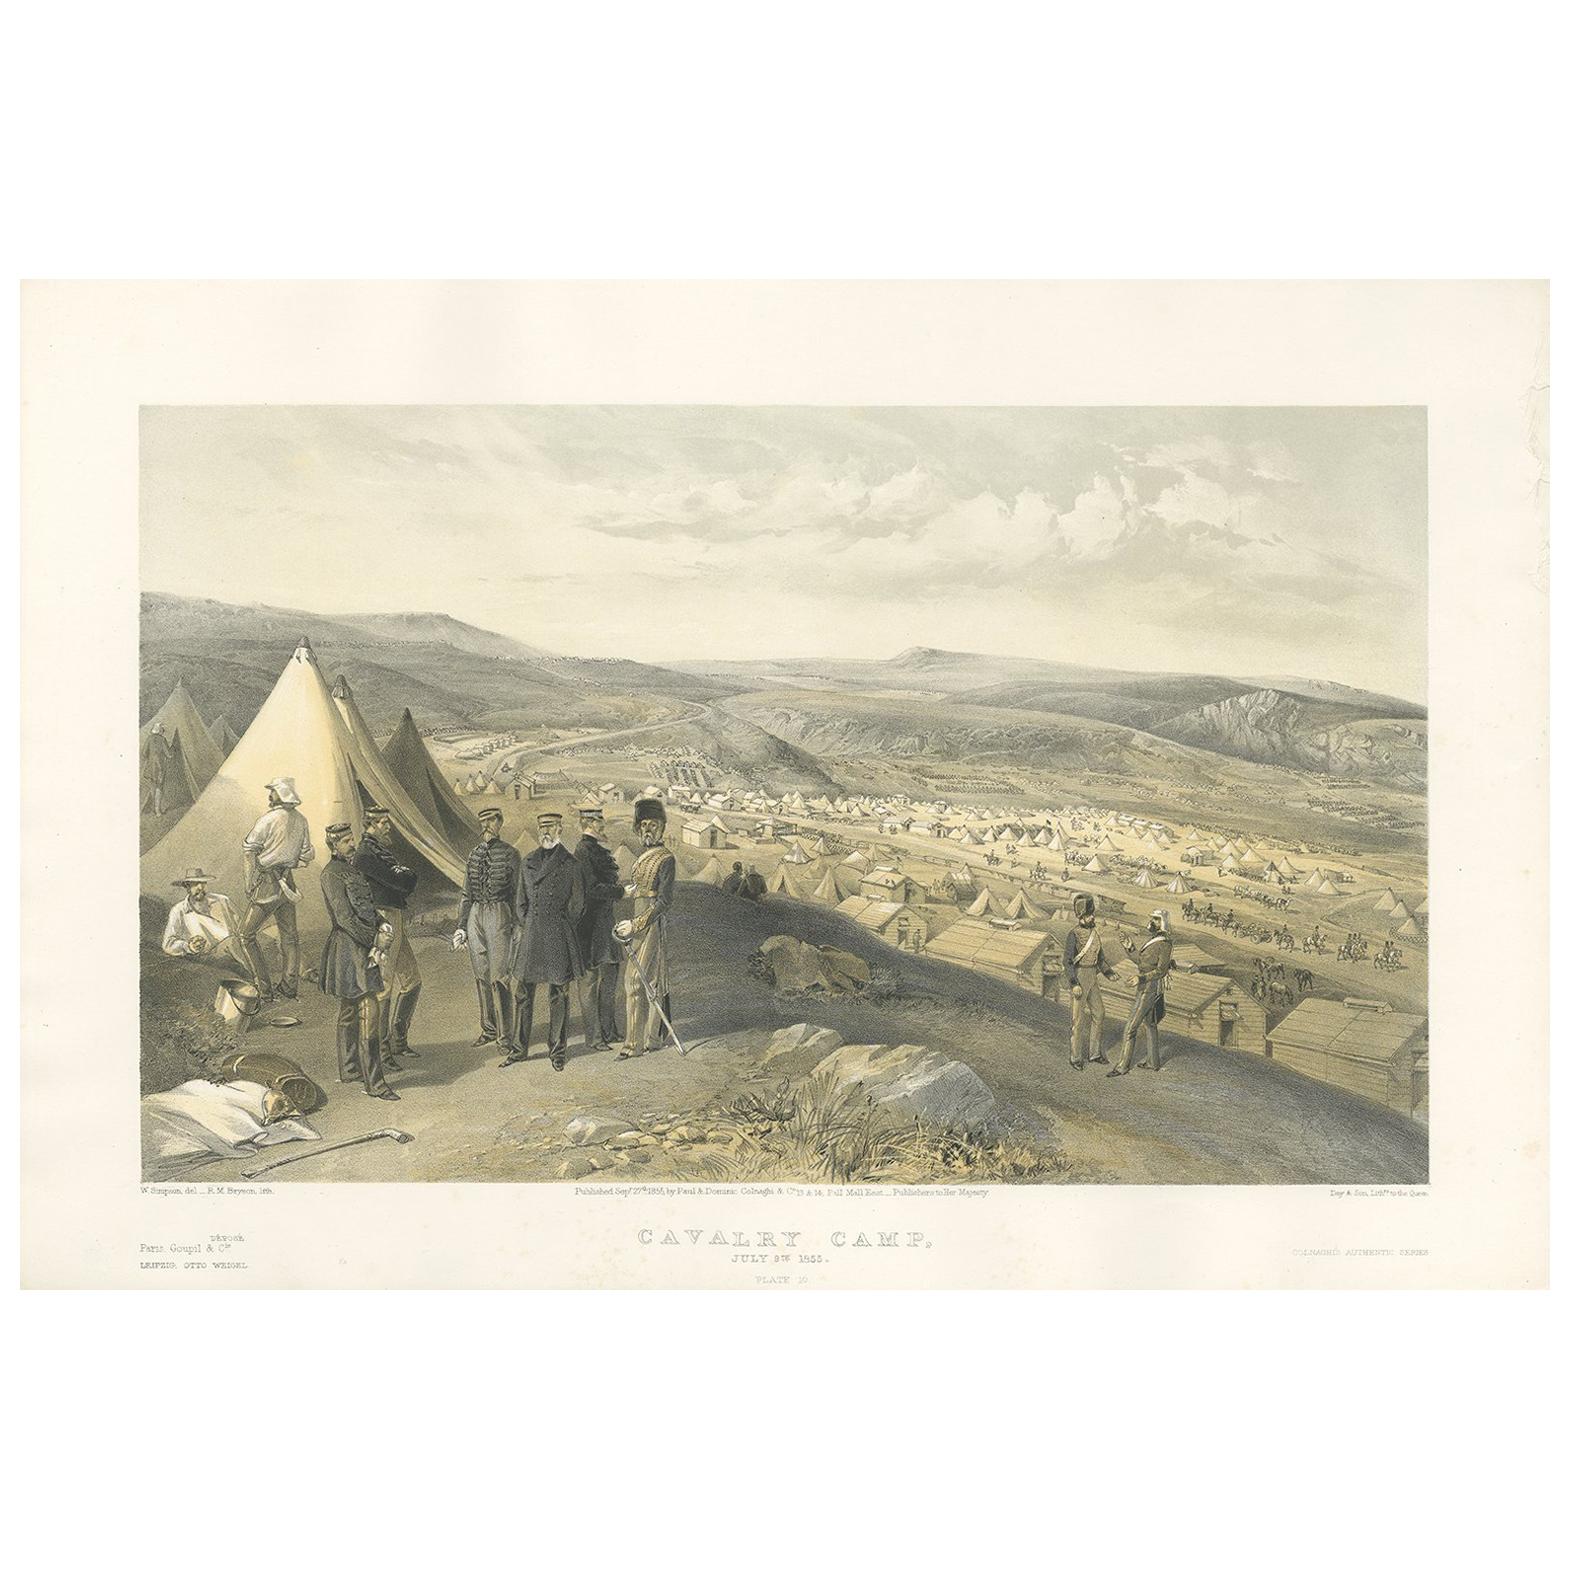 Antique Print of the Cavalry Camp 'Crimean War' by W. Simpson, 1855 For Sale